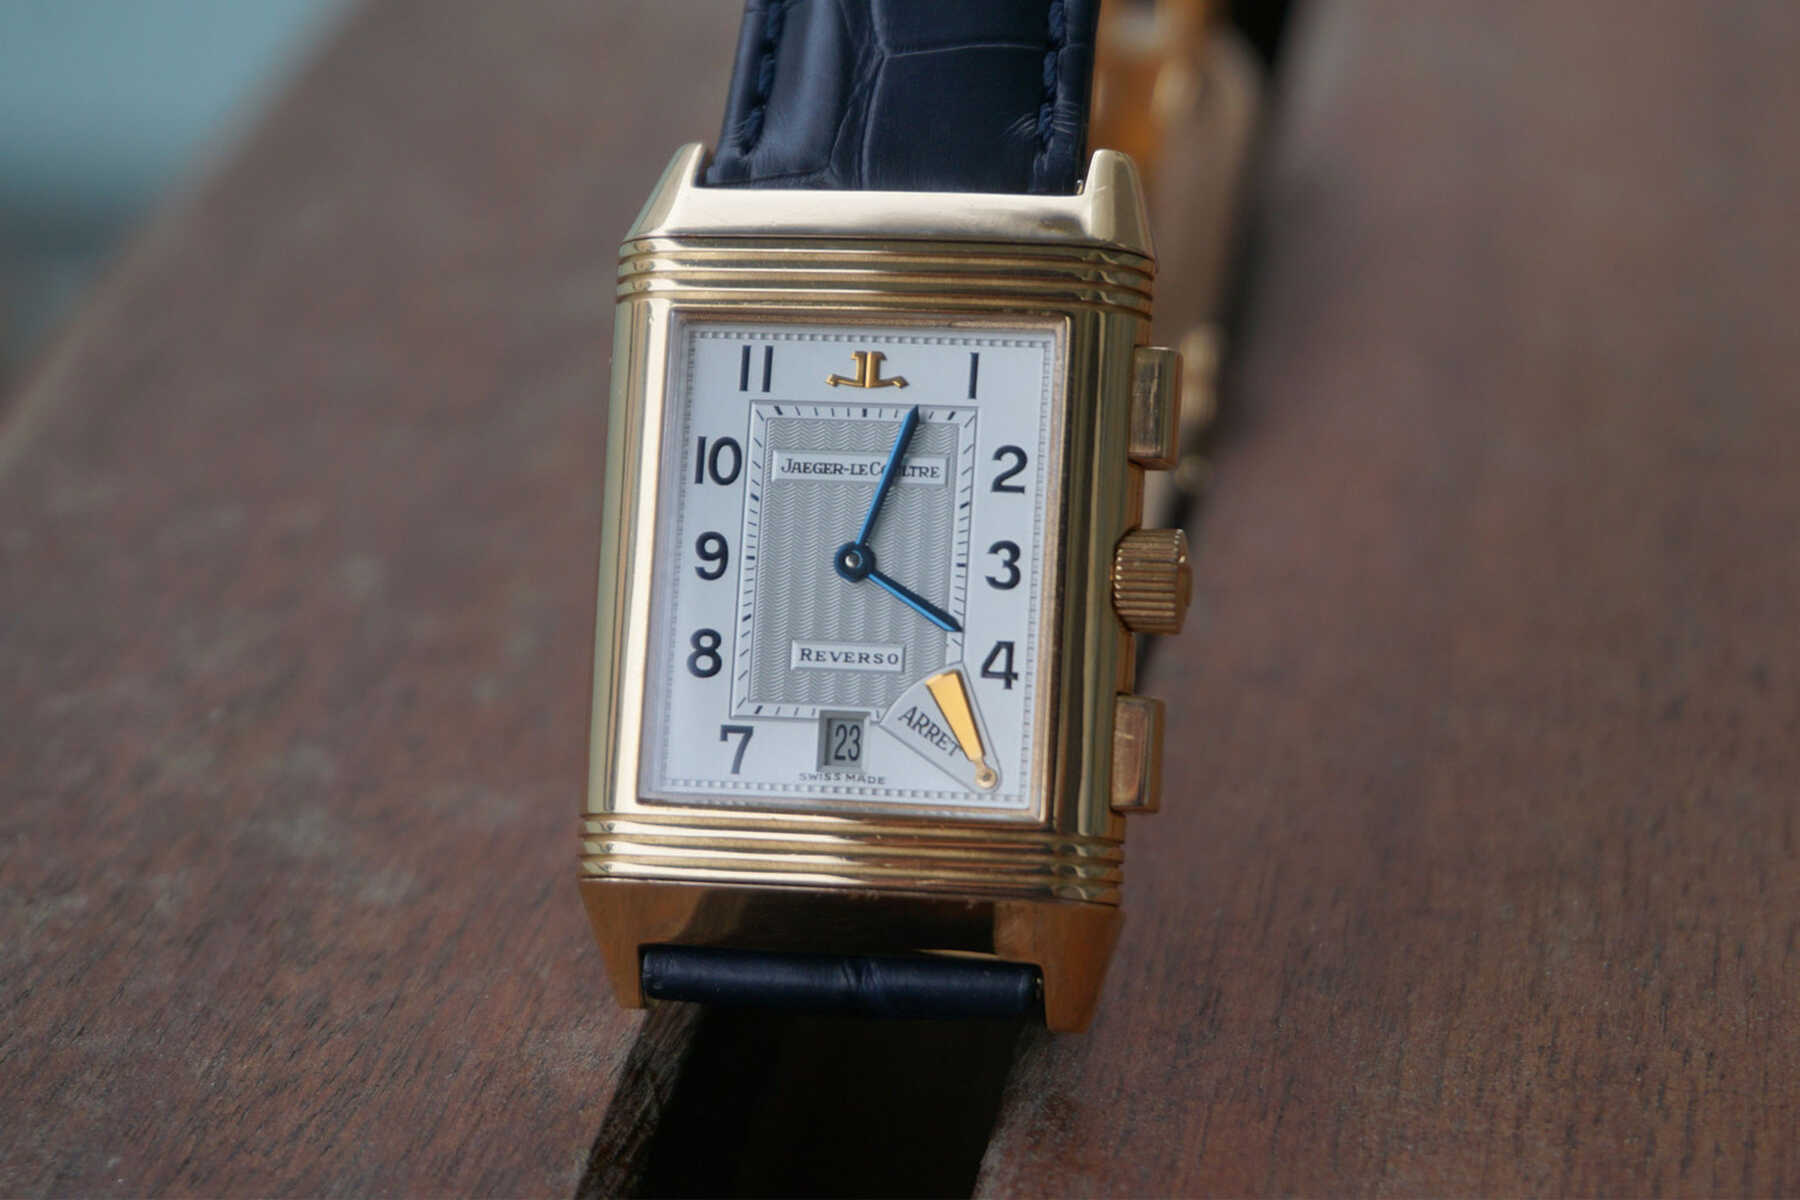 The Jaeger-LeCoultre Reverso Chronographe Retrograde, The First In-House Integrated Chronograph Post-Quartz Crisis